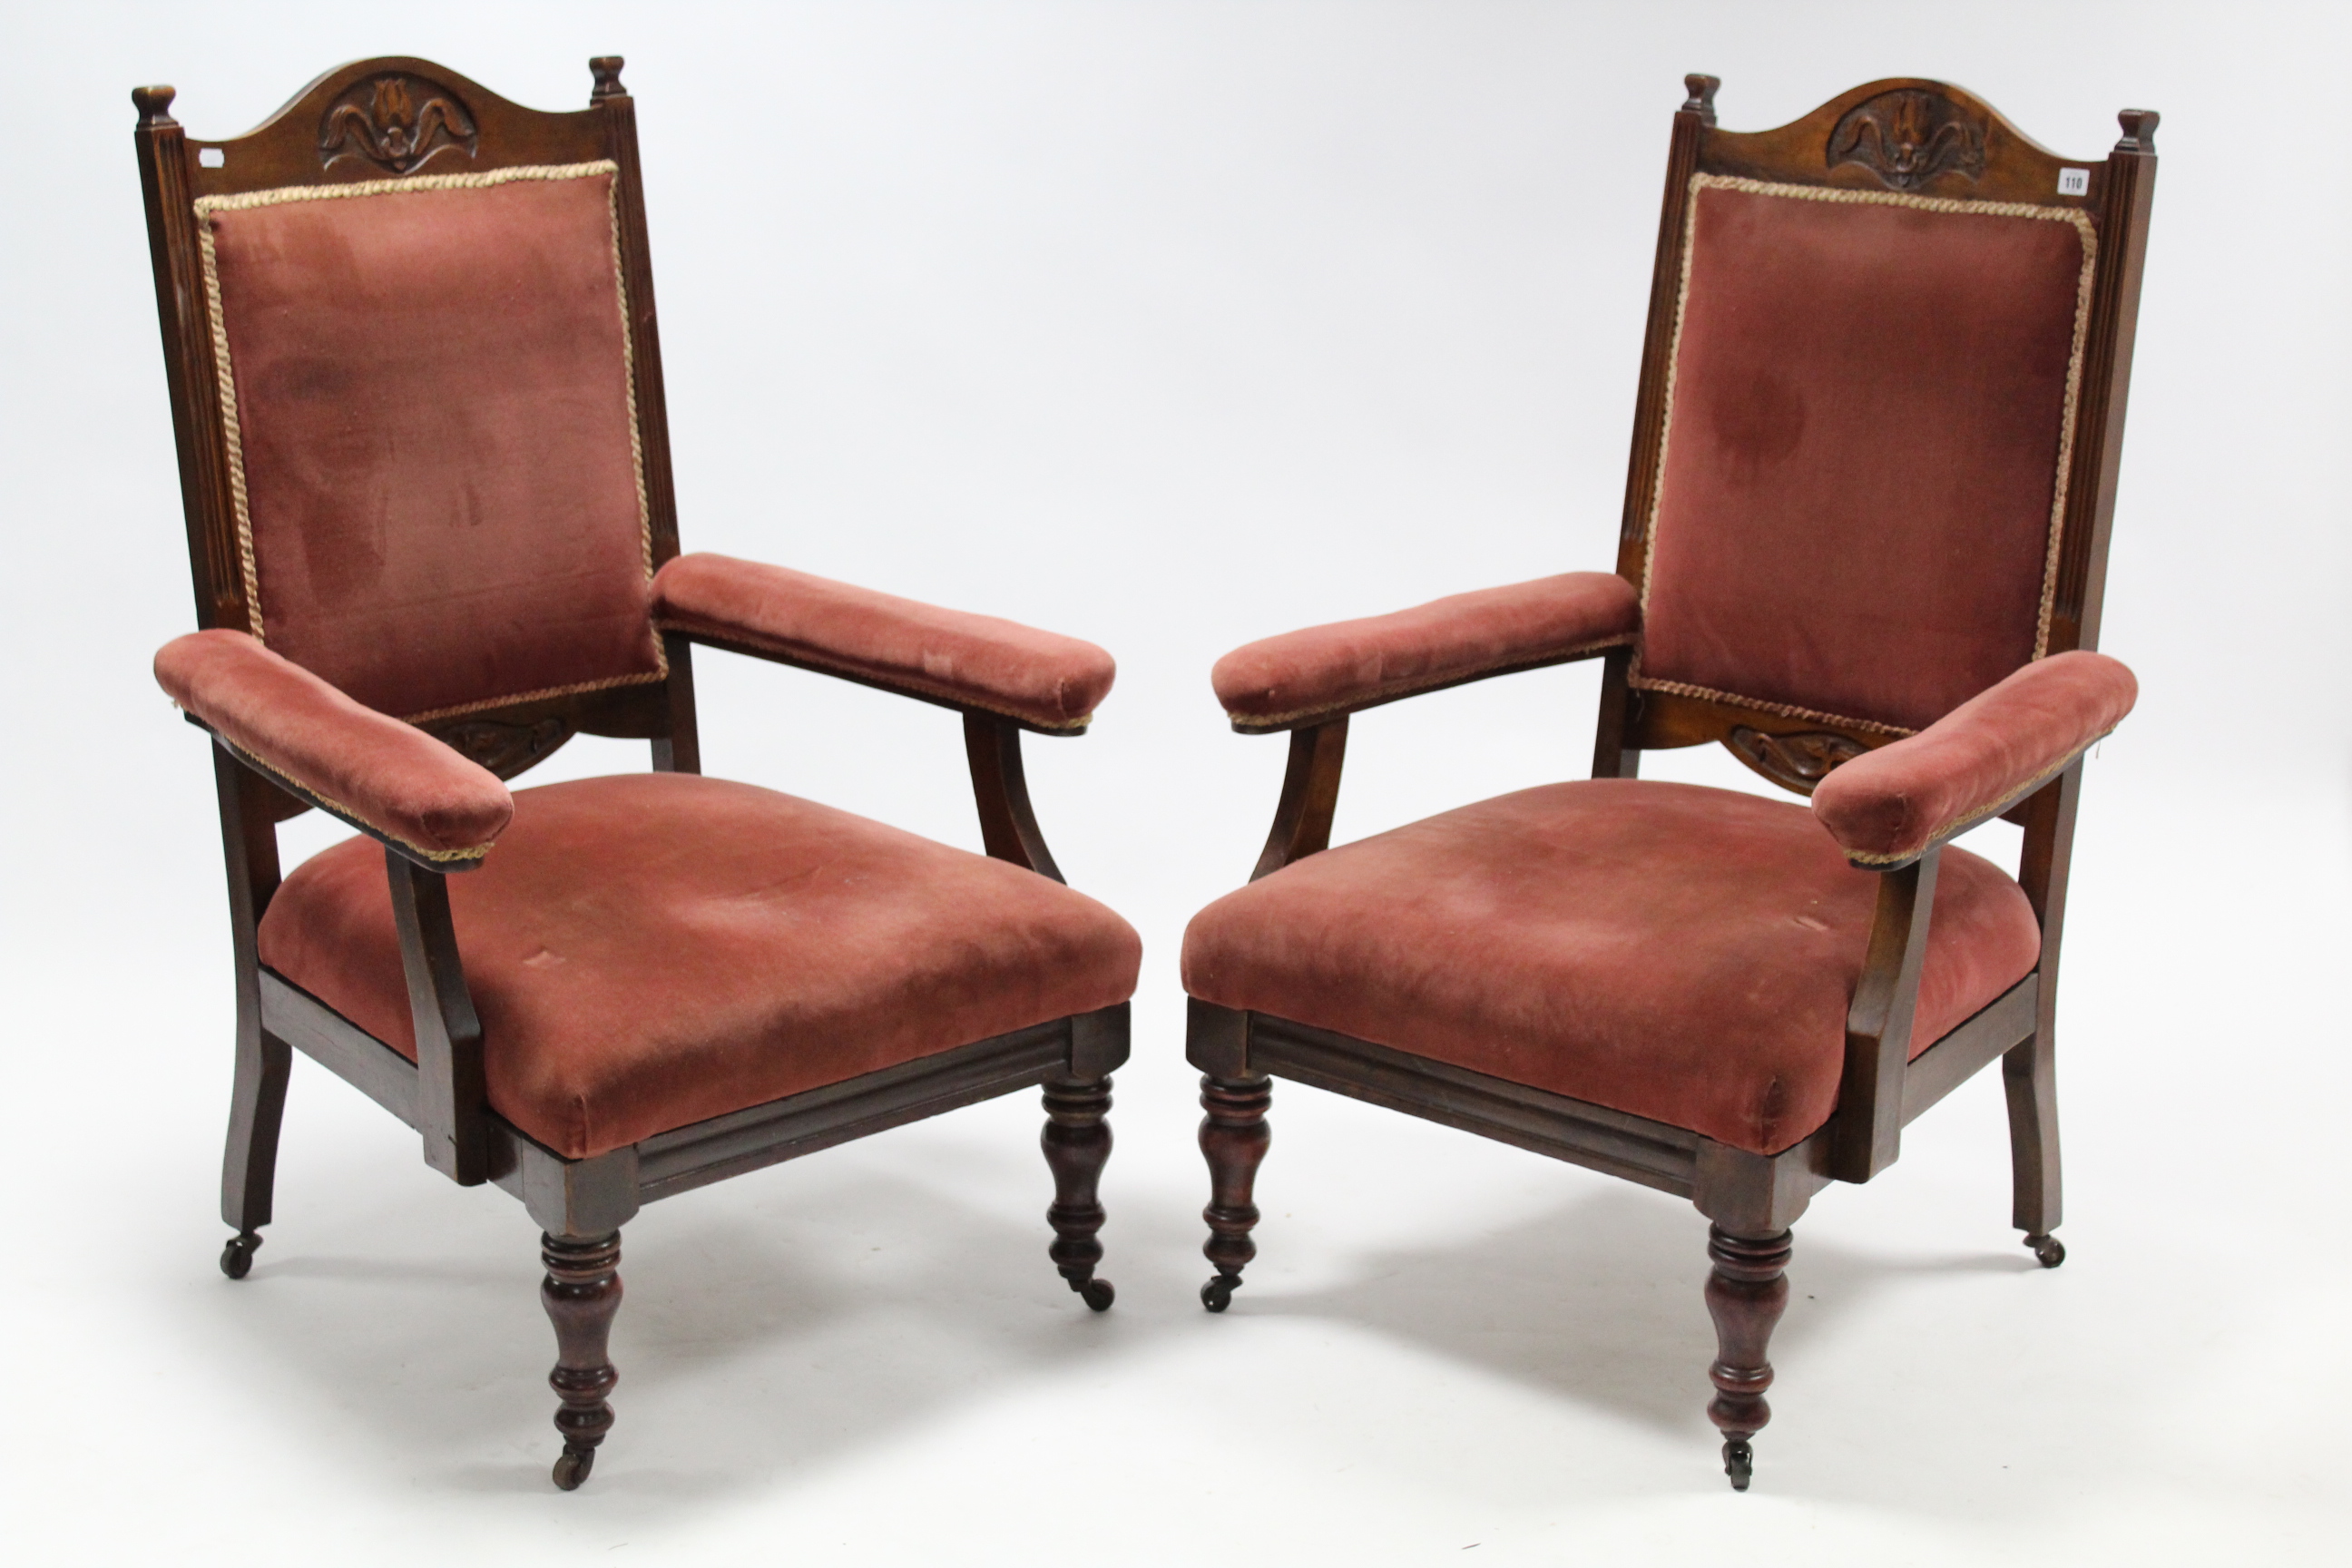 A pair of Edwardian carved walnut frame armchairs with padded back, arms, & sprung seats upholstered